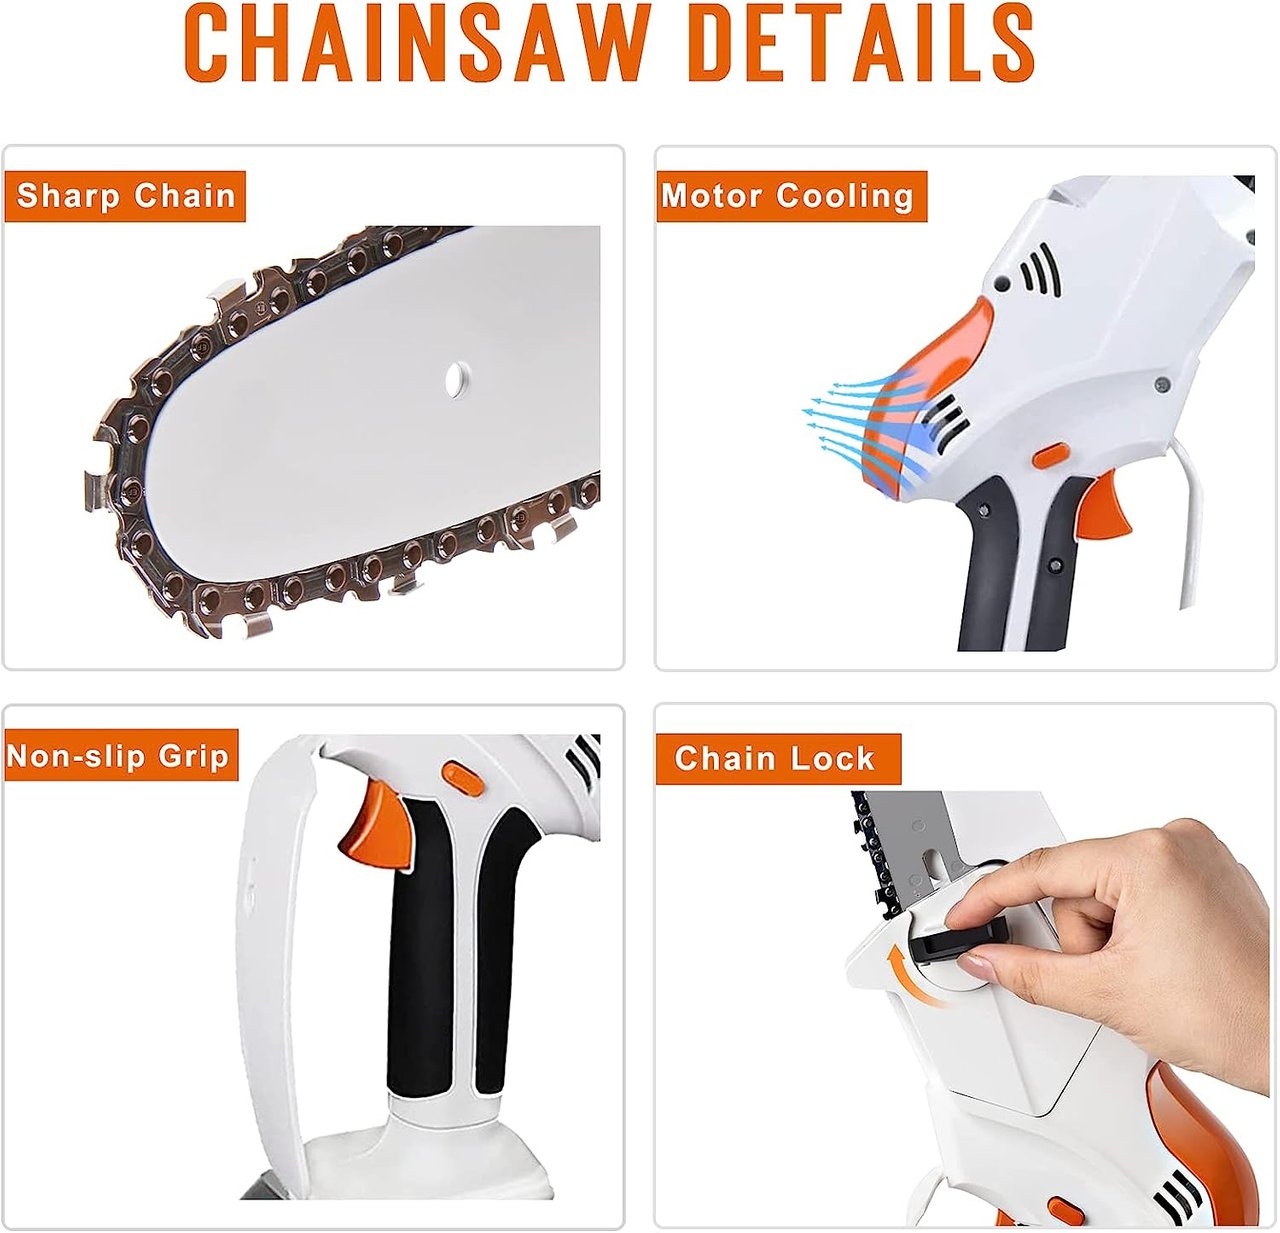 4 Peektook Mini Chainsaw Cordless Electric Chainsaw, Upgrated 6 Inch Chain Saw with 2 Battery and 2 Chains, Portable Scie à Chaîne à Batterie with Safety Lock and Strong Power Perfect for Trim Shrubs/Branches/Logging in Gardens Yards and Camping